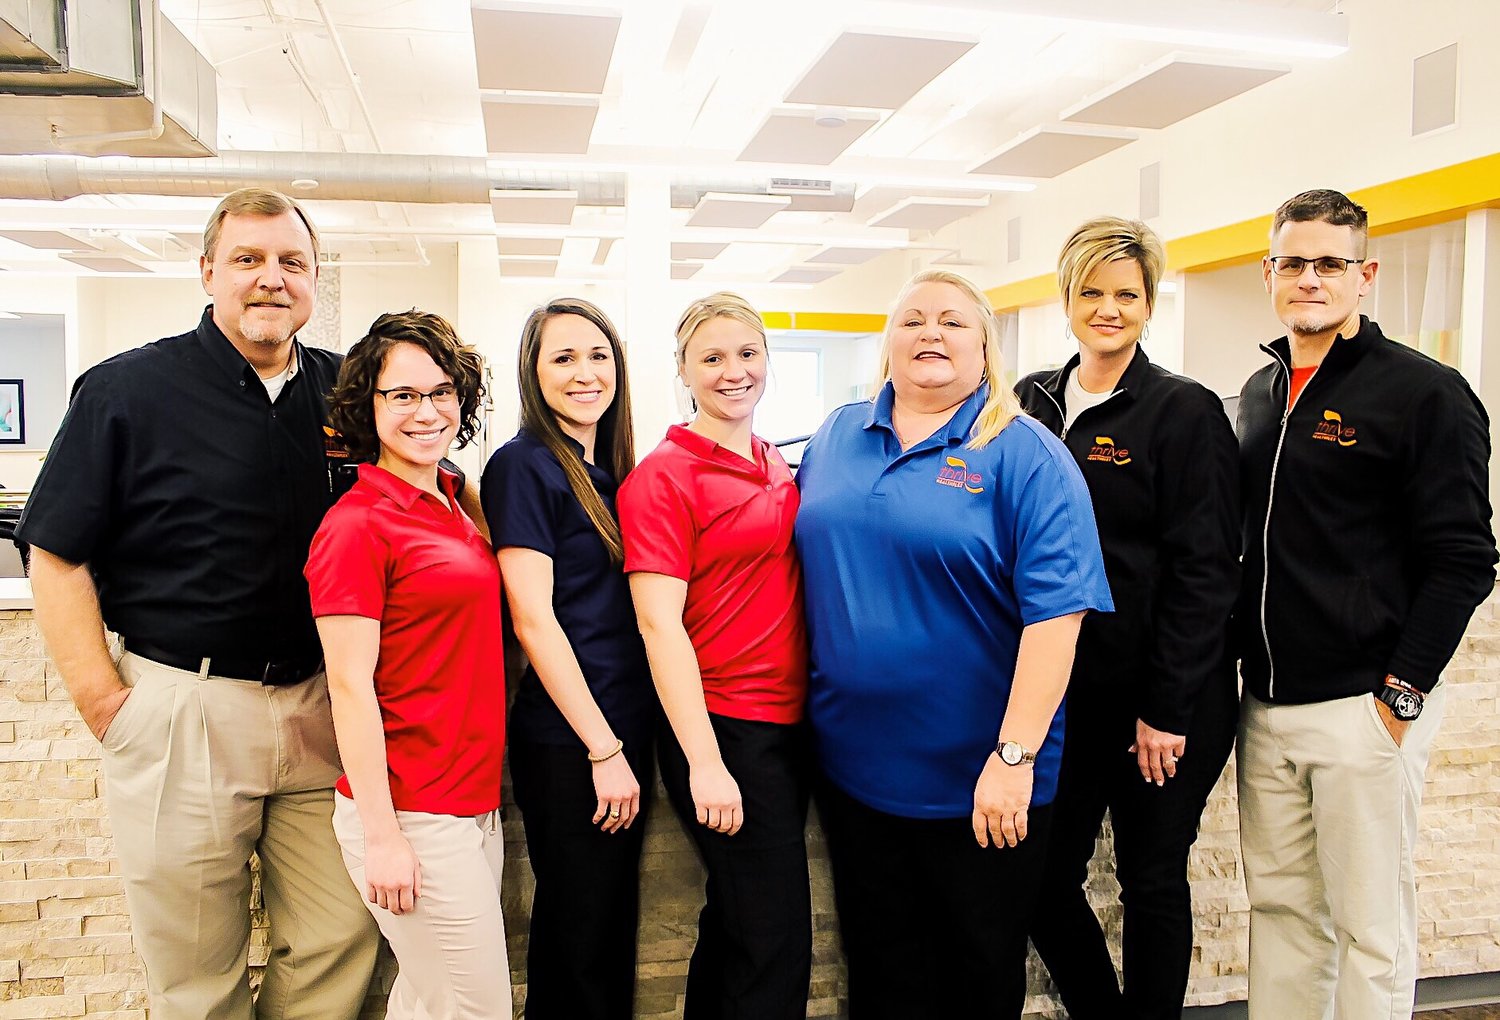 Members of the physical therapy team from Thrive are among the best in South Central Texas.